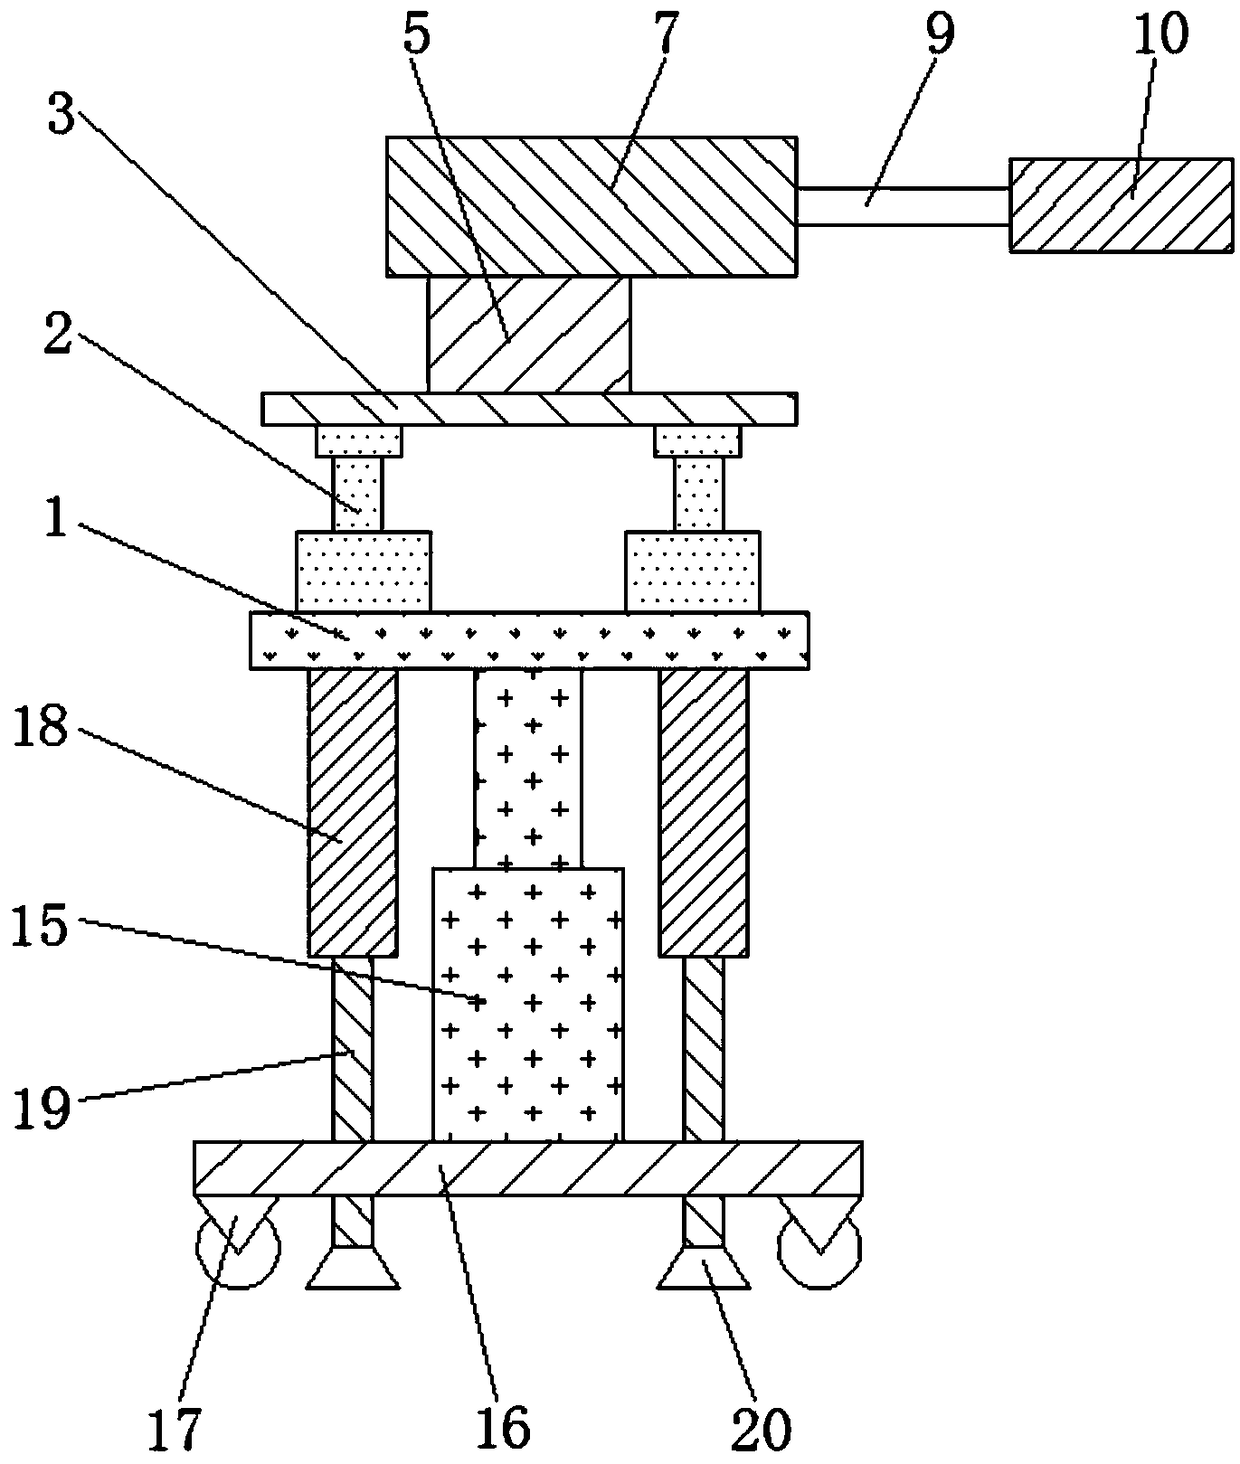 Feeding and discharging device for liquid injection machine